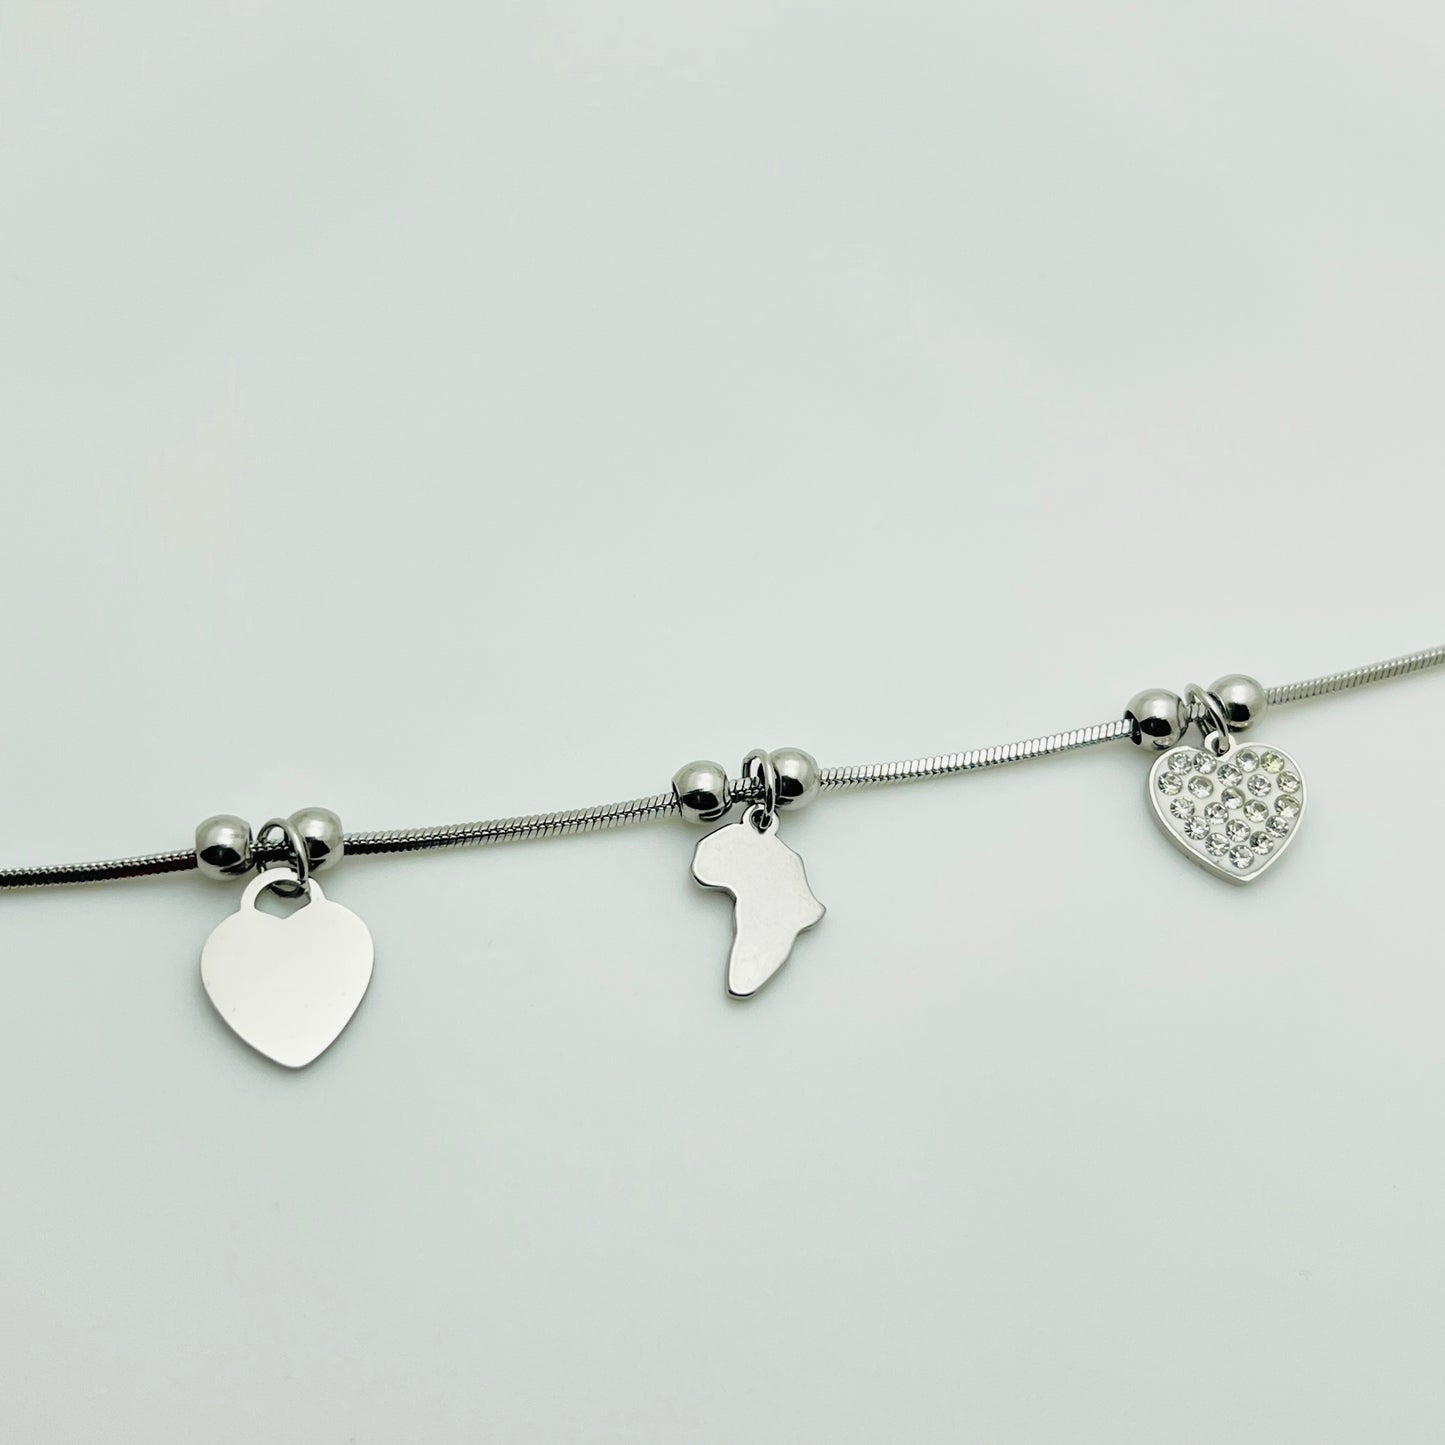 Silver Crystal Heart Map of Africa Charm Bracelet